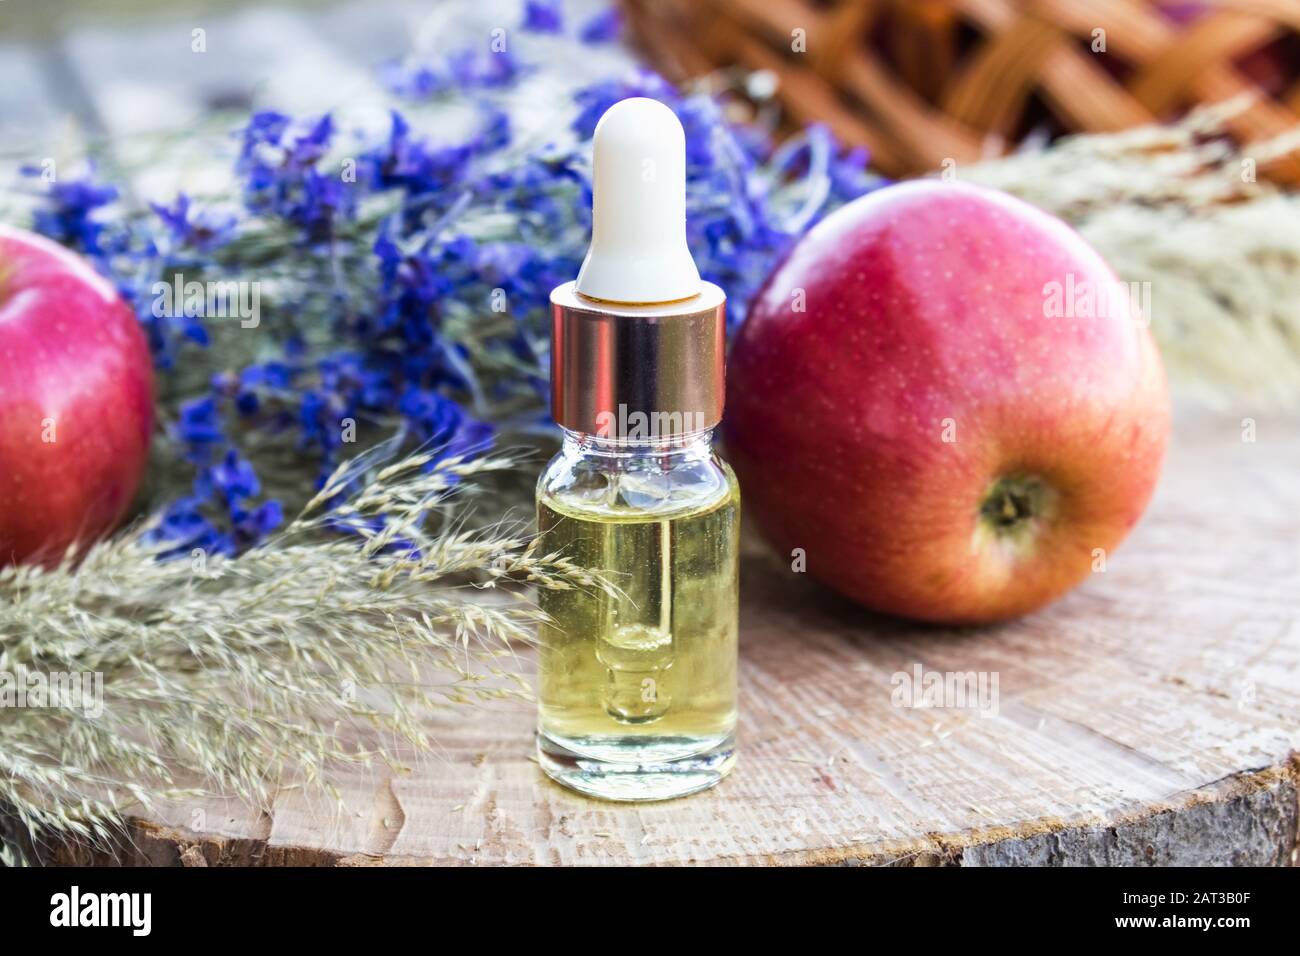 Bottle of apple essential oil and fresh apples on a wooden table. Essential  oil is used to fill lamps, perfumes and in cosmetics. Close-up Stock Photo  - Alamy